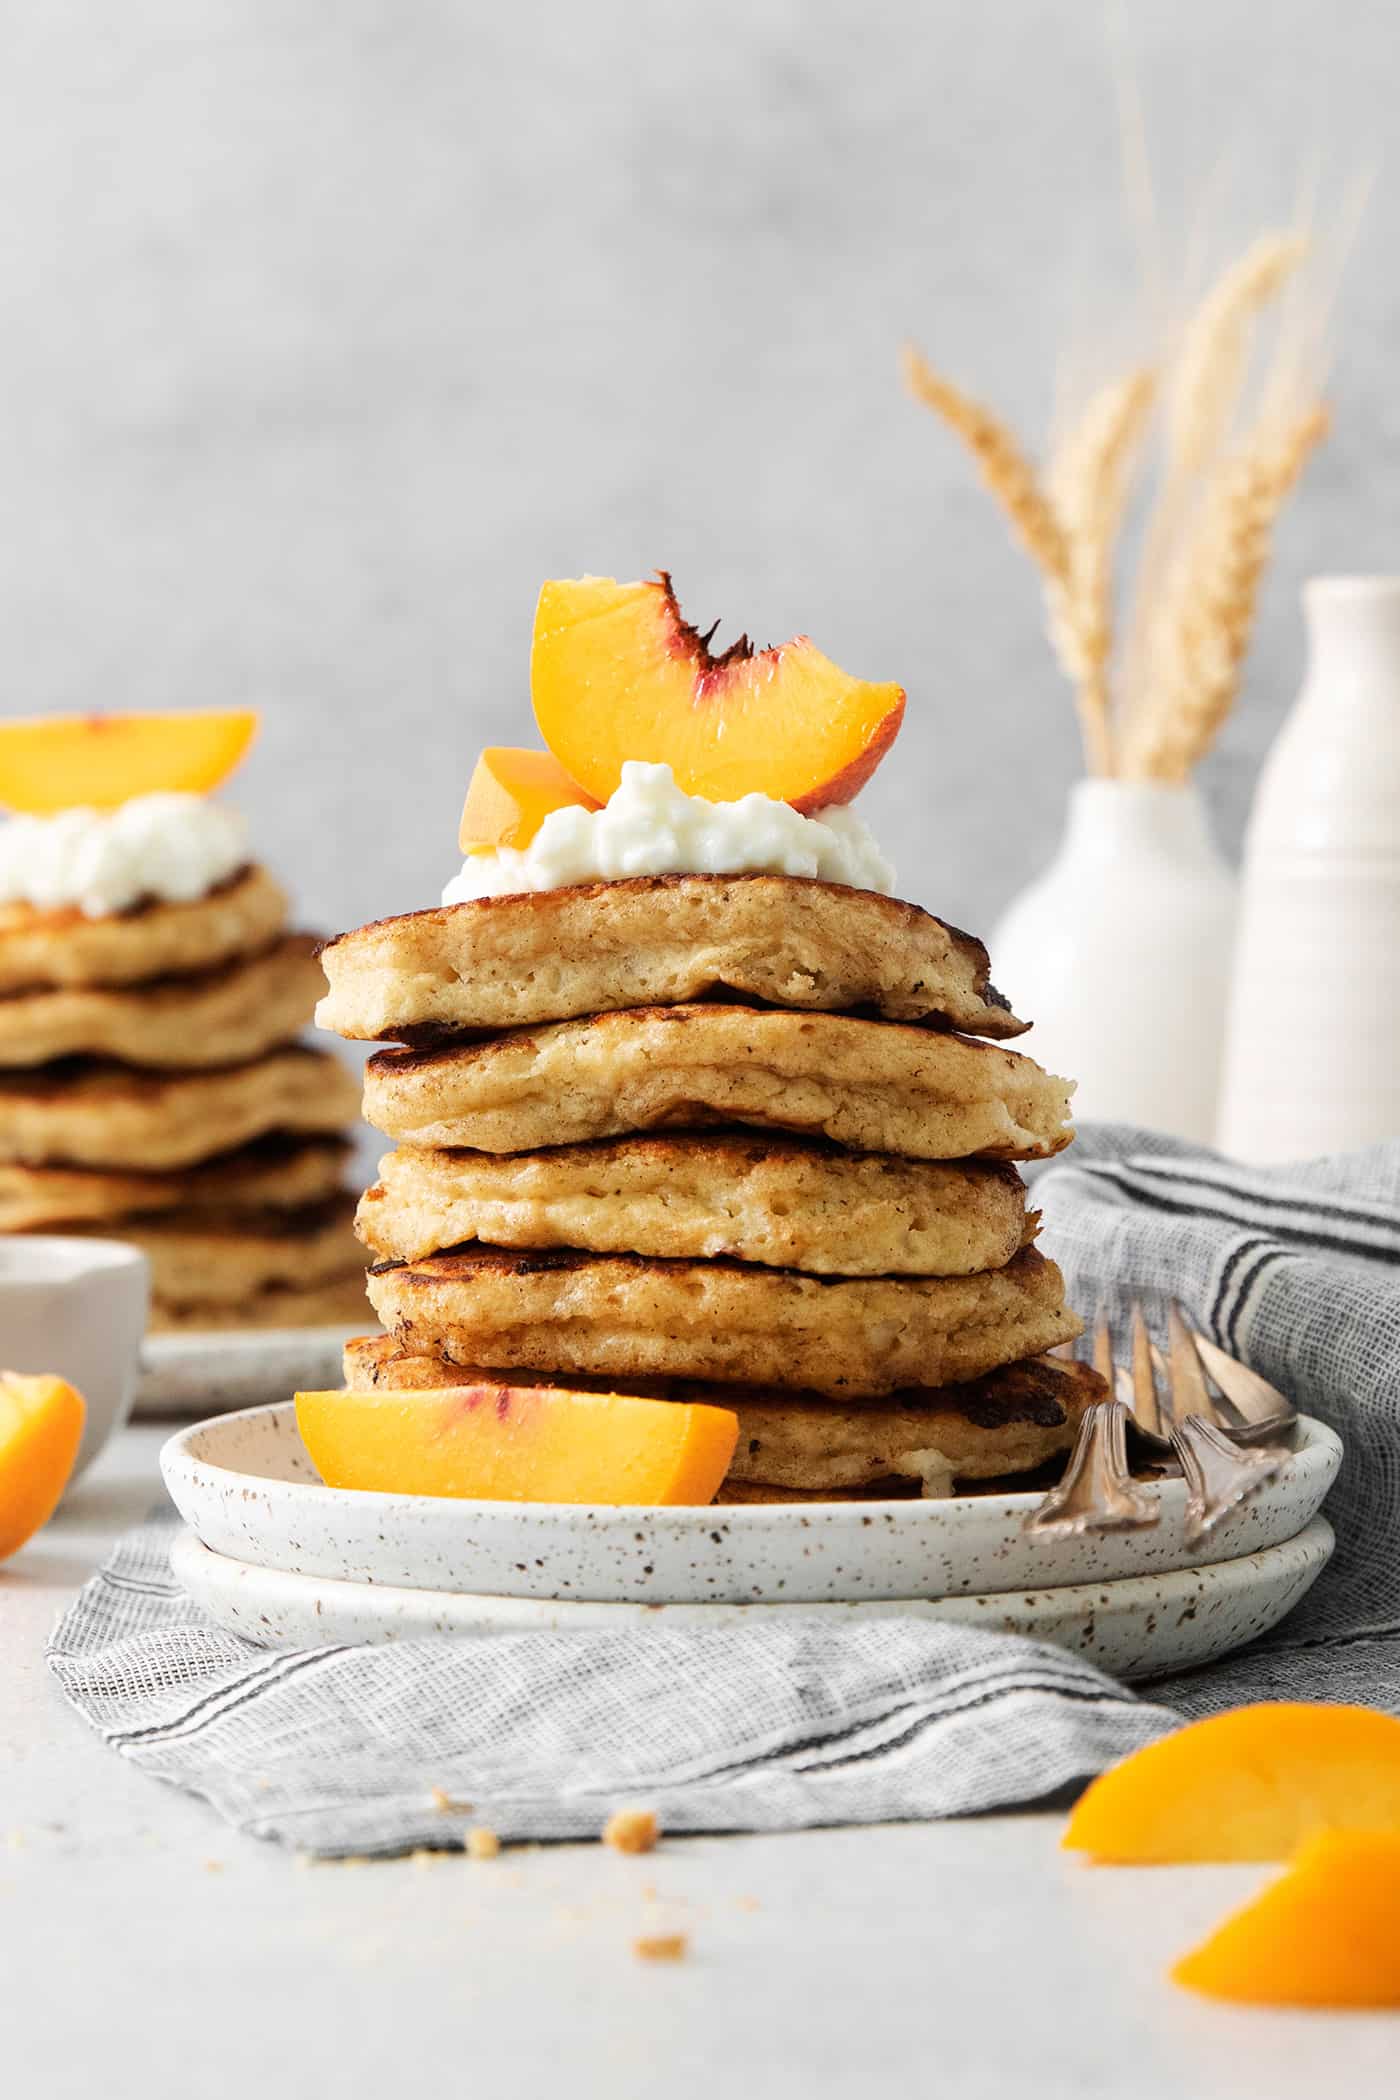 Peach slices and whipped cream top cottage cheese pancakes with more seen in the background.